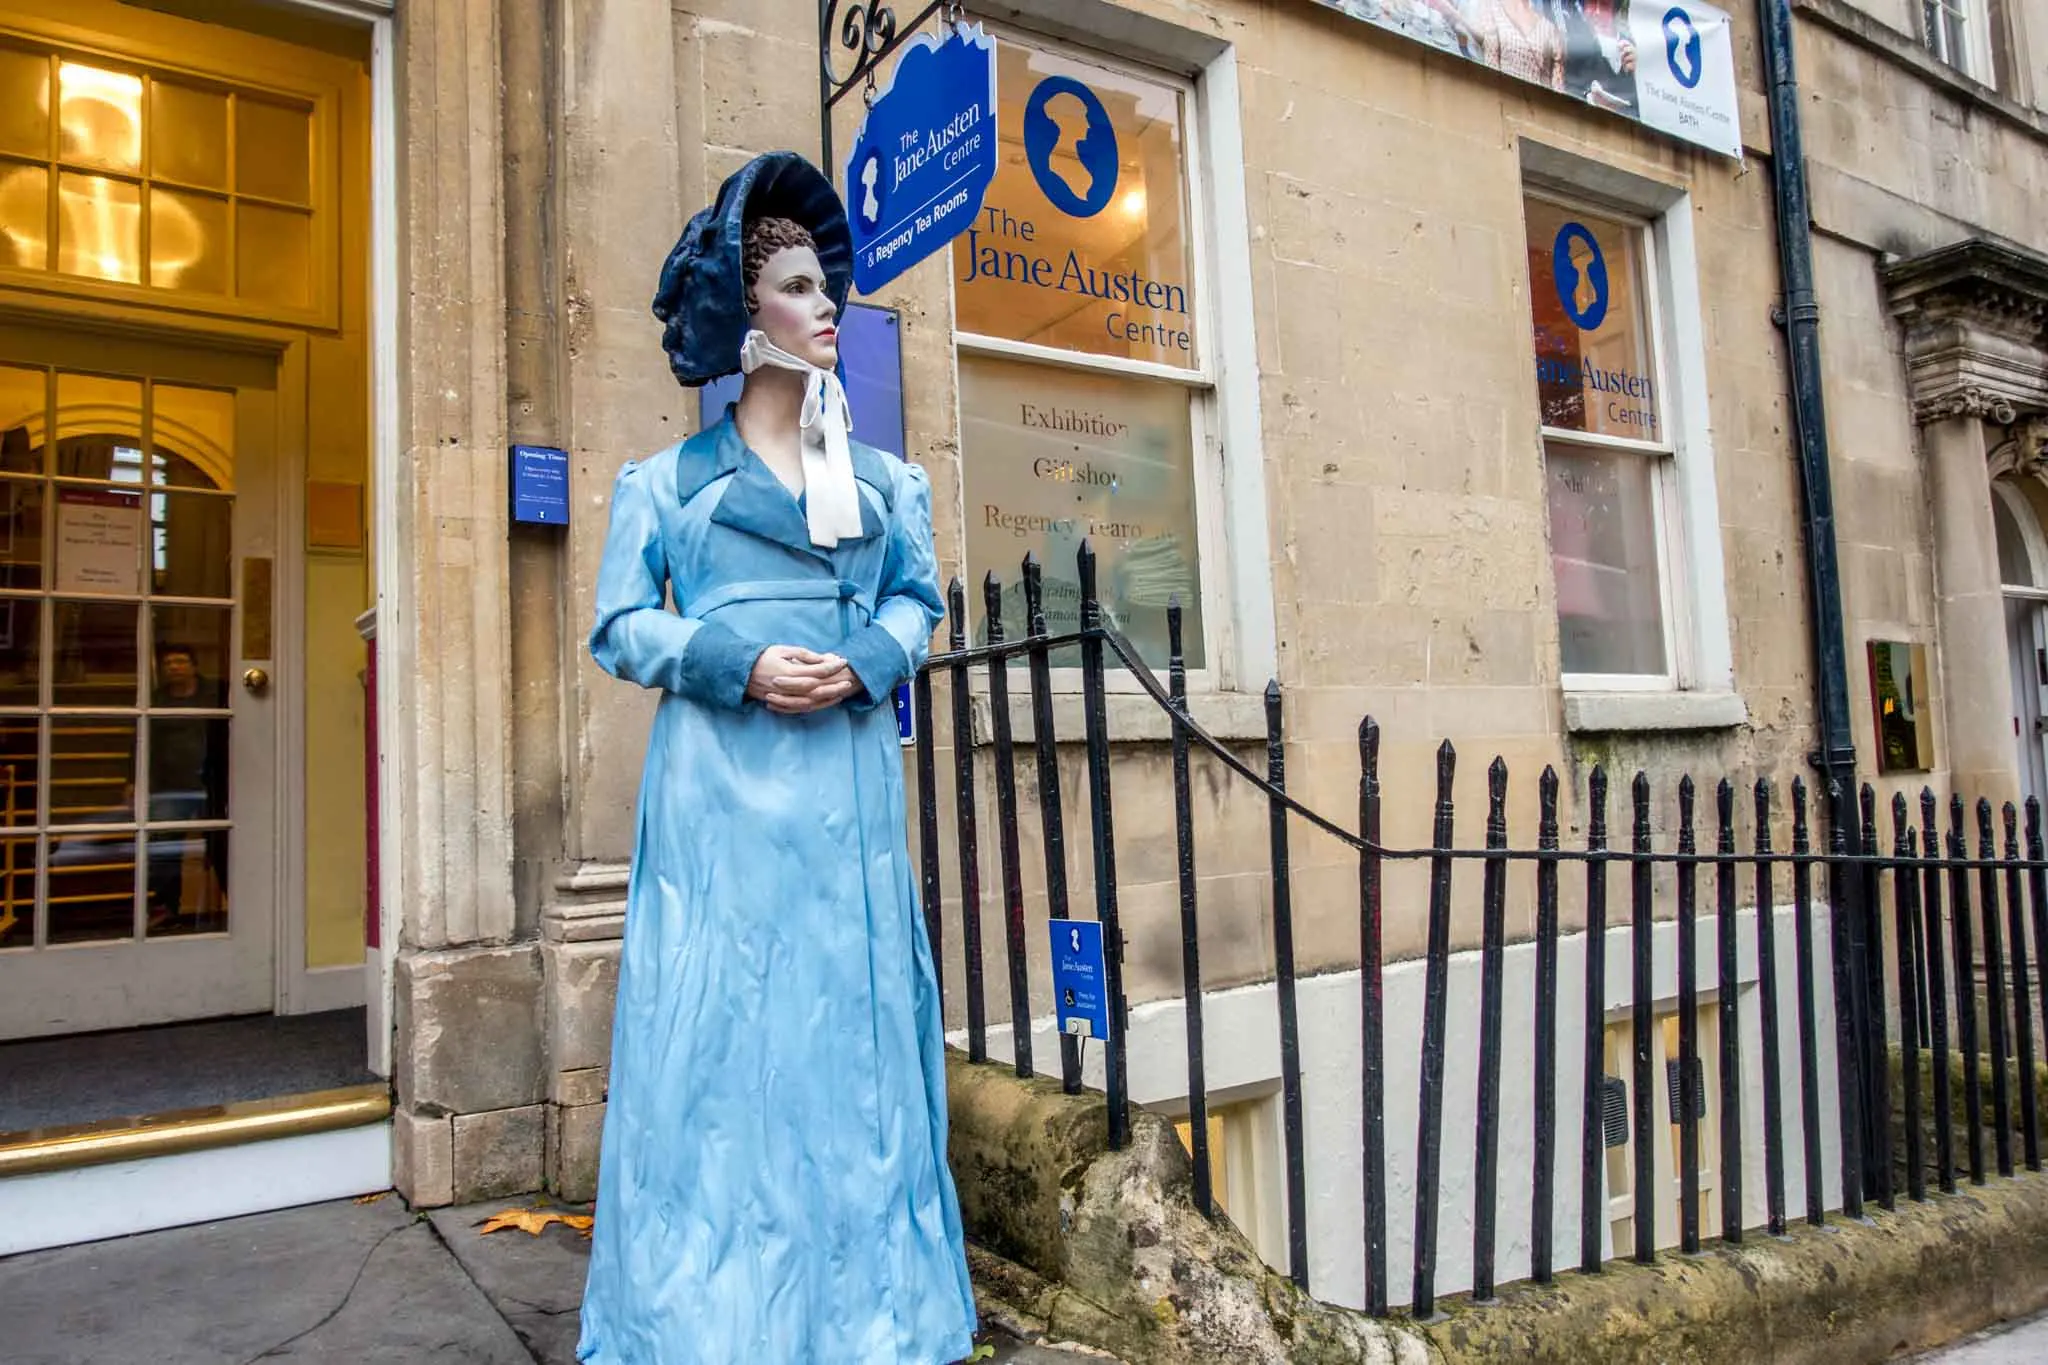 Statue in front of the Jane Austen Center, one of the top places to see in Bath UK